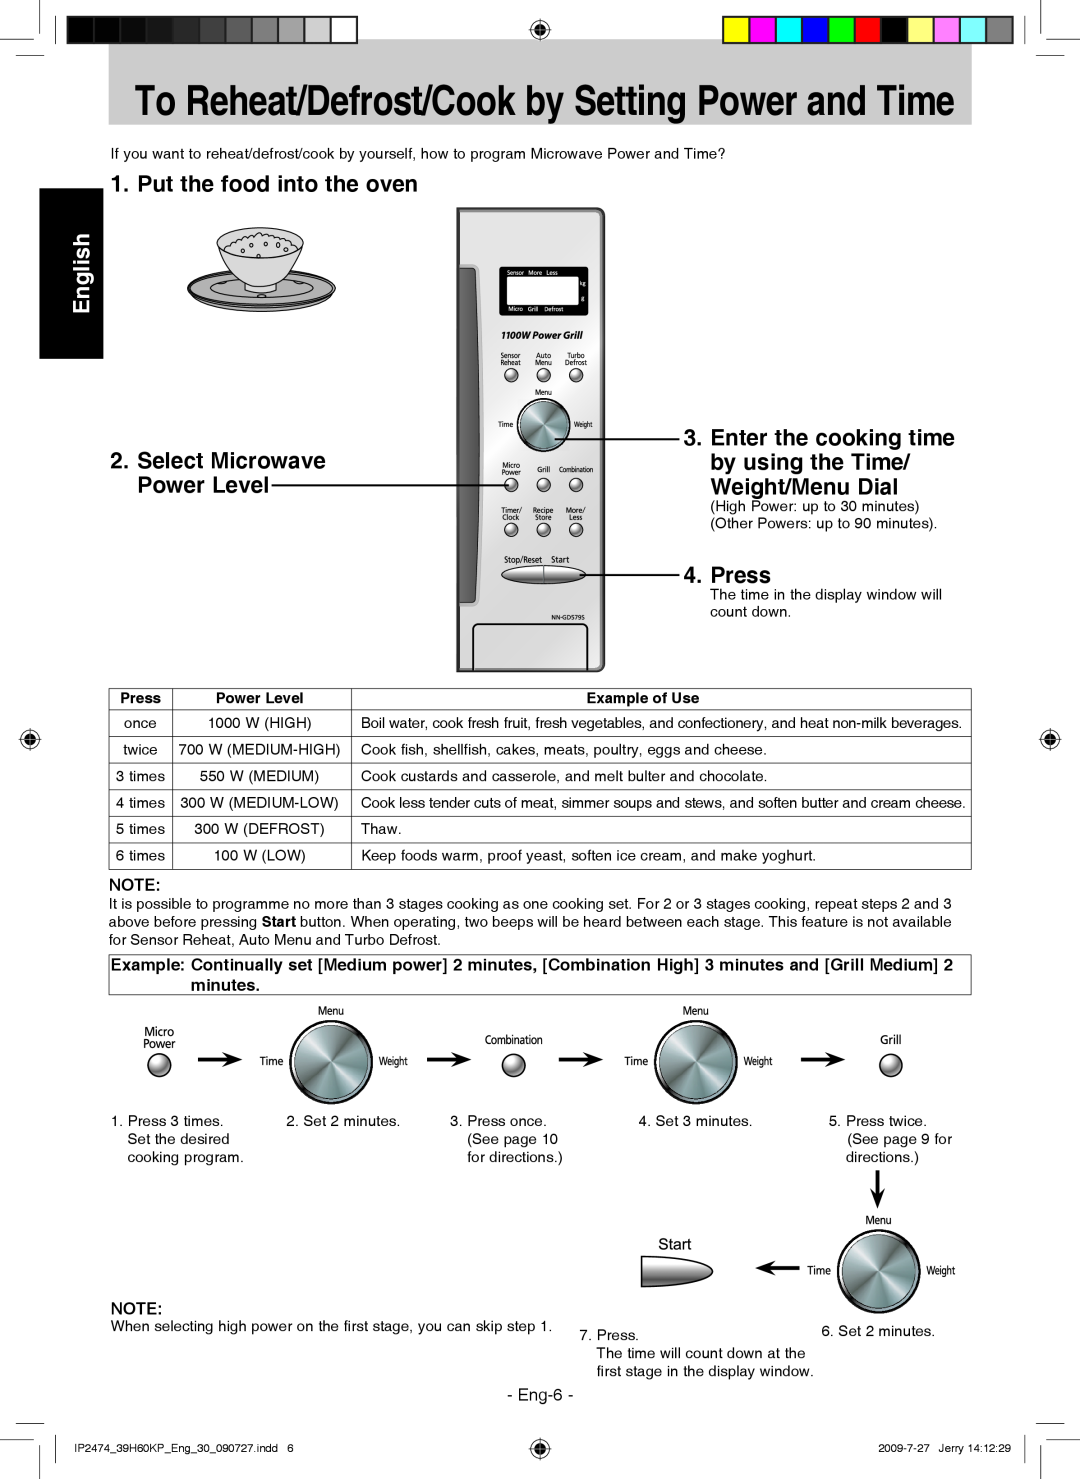 Panasonic NN-GD579S manual Put the food into the oven, Select Microwave Power Level, Press, English, Eng-6, Example of Use 